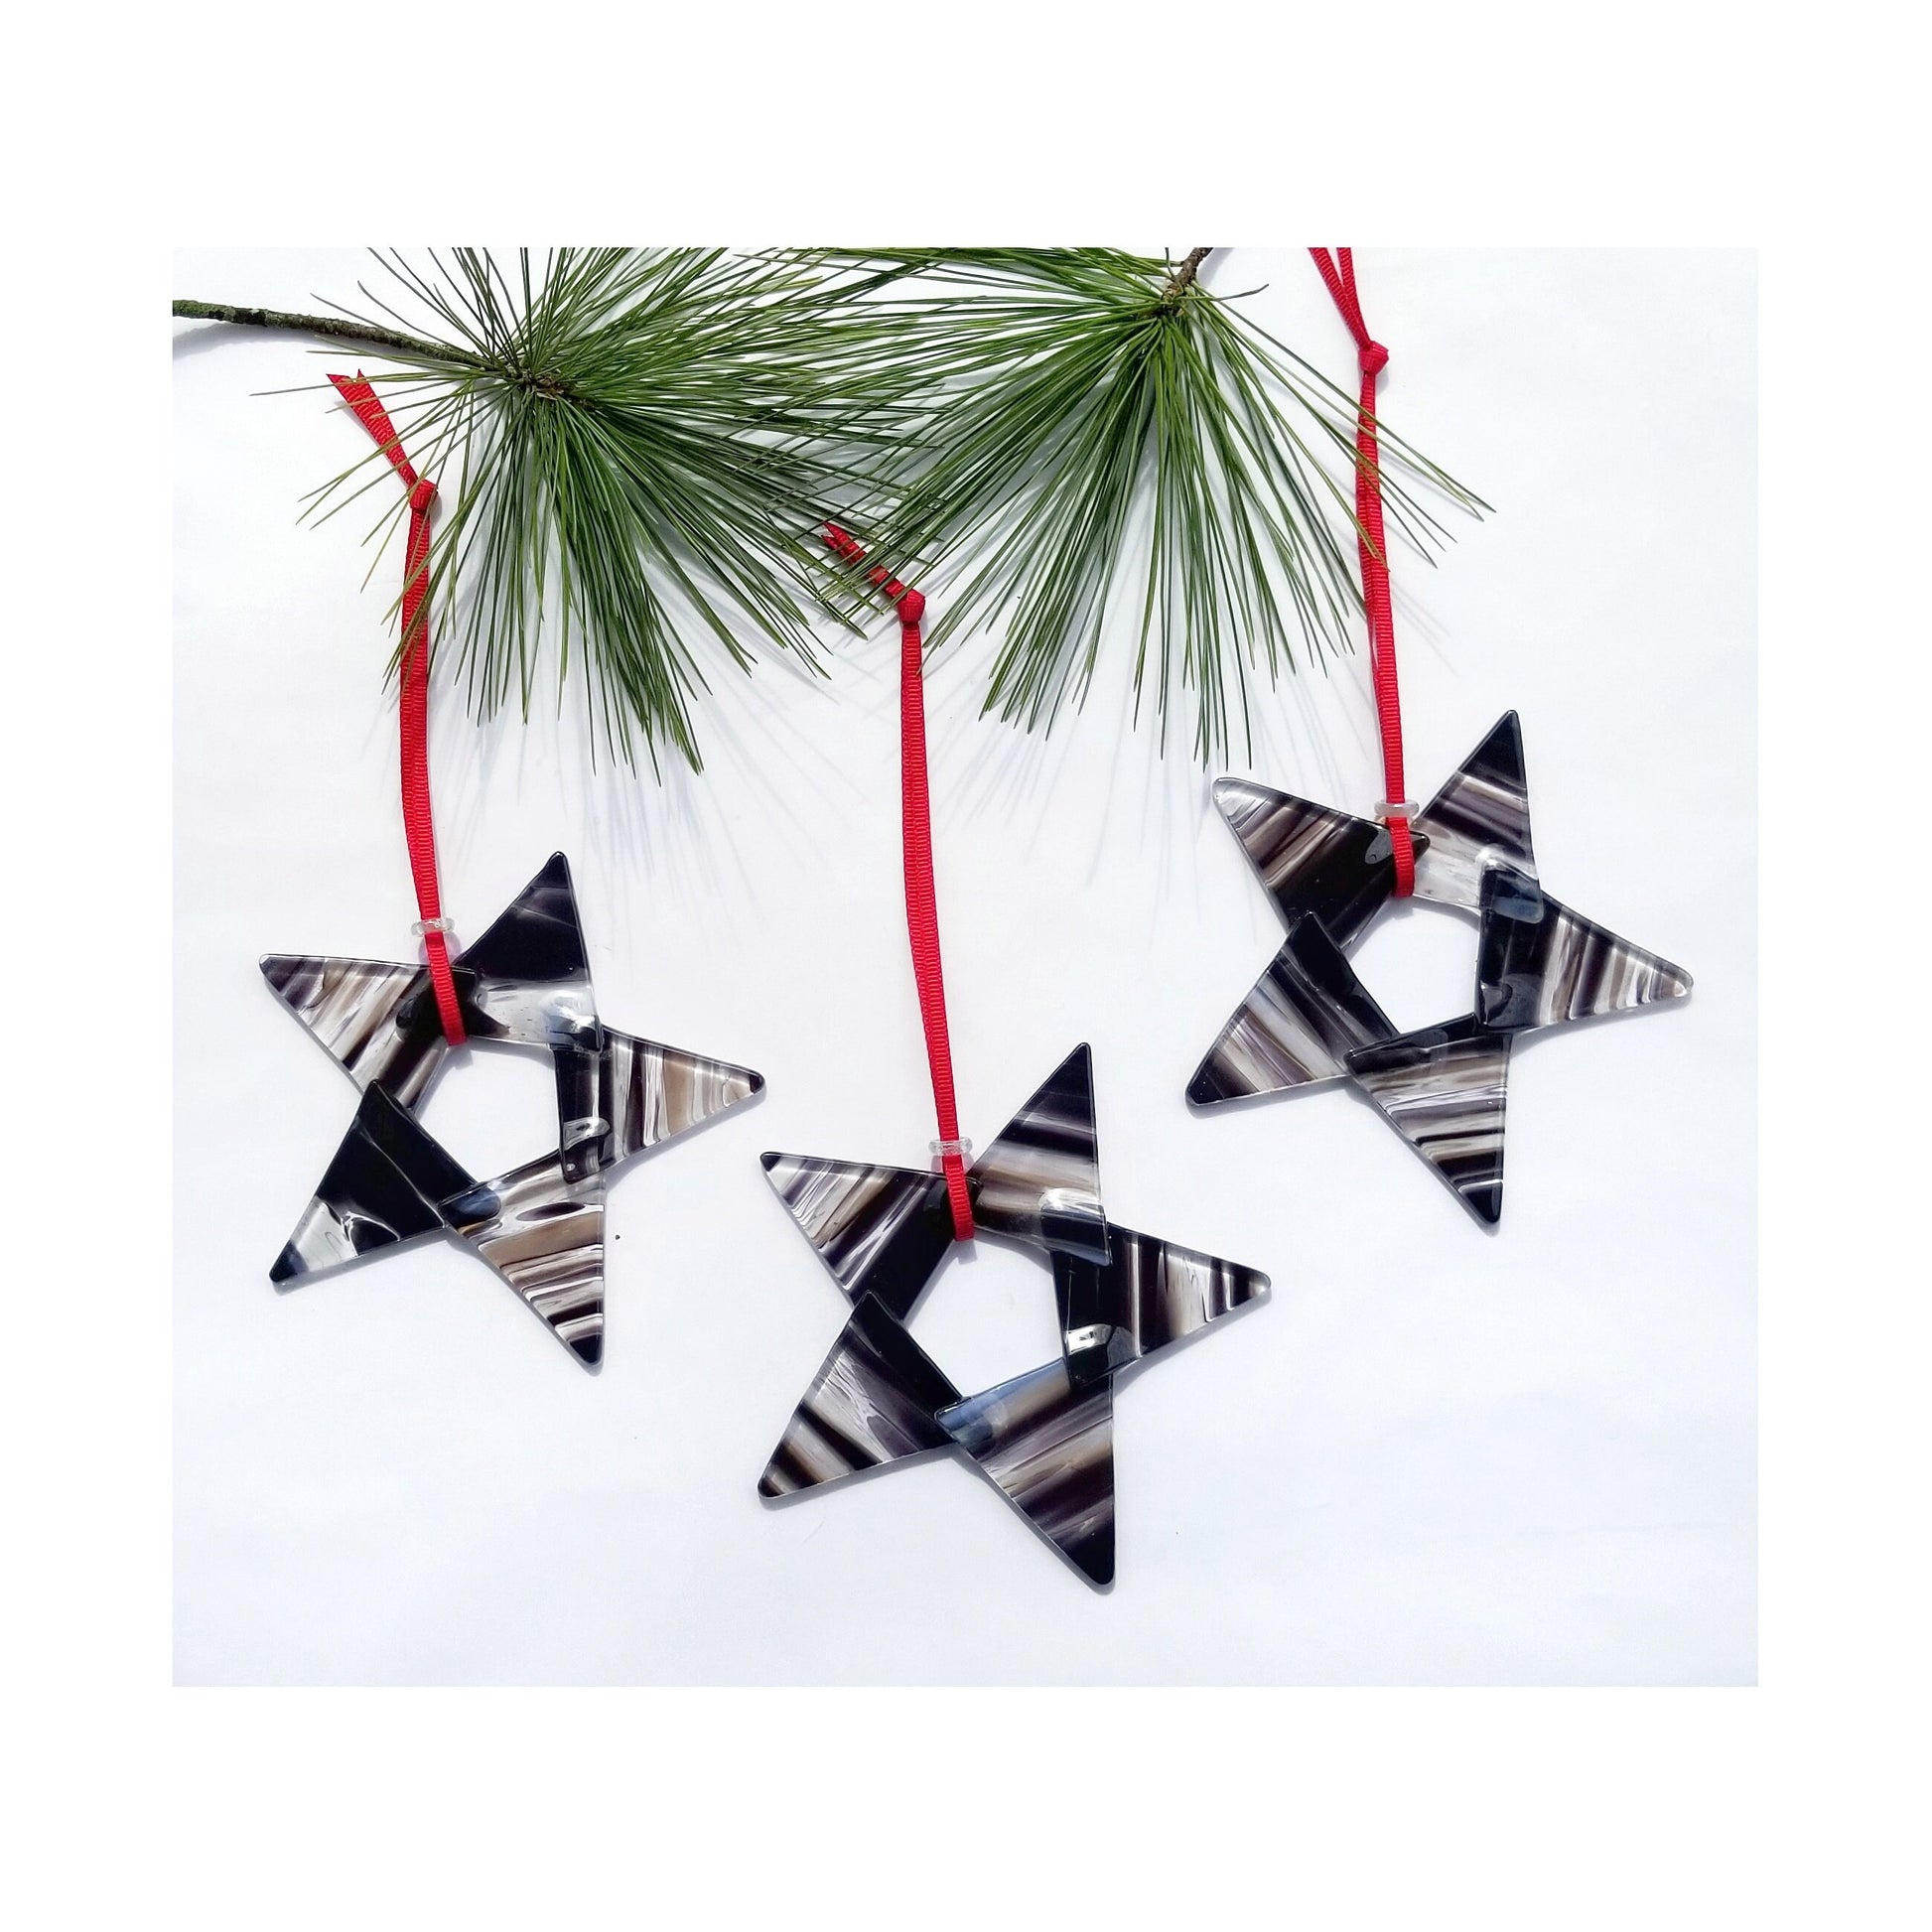 Fused Glass Star Suncatcher. Black & White Christmas Theme. Mantle Decor, Window Hanging Ornament. Gift boxed, shipped free.